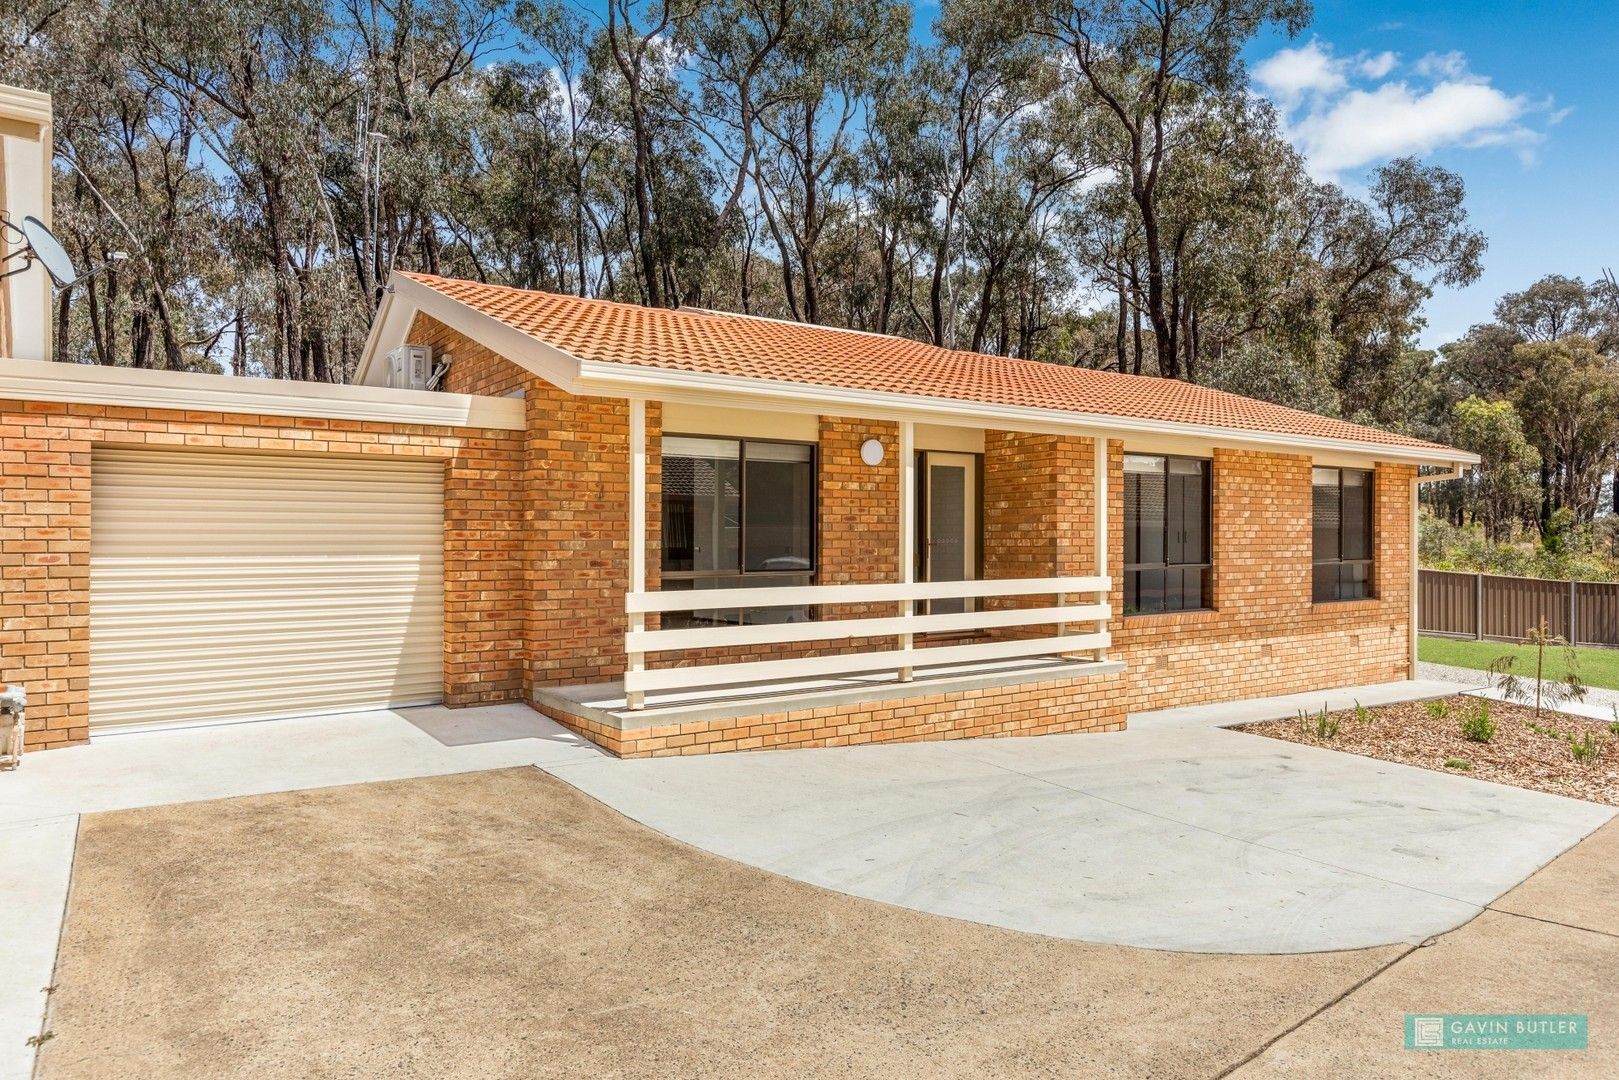 2 bedrooms House in Unit 3/126 Edwards Rd KENNINGTON VIC, 3550